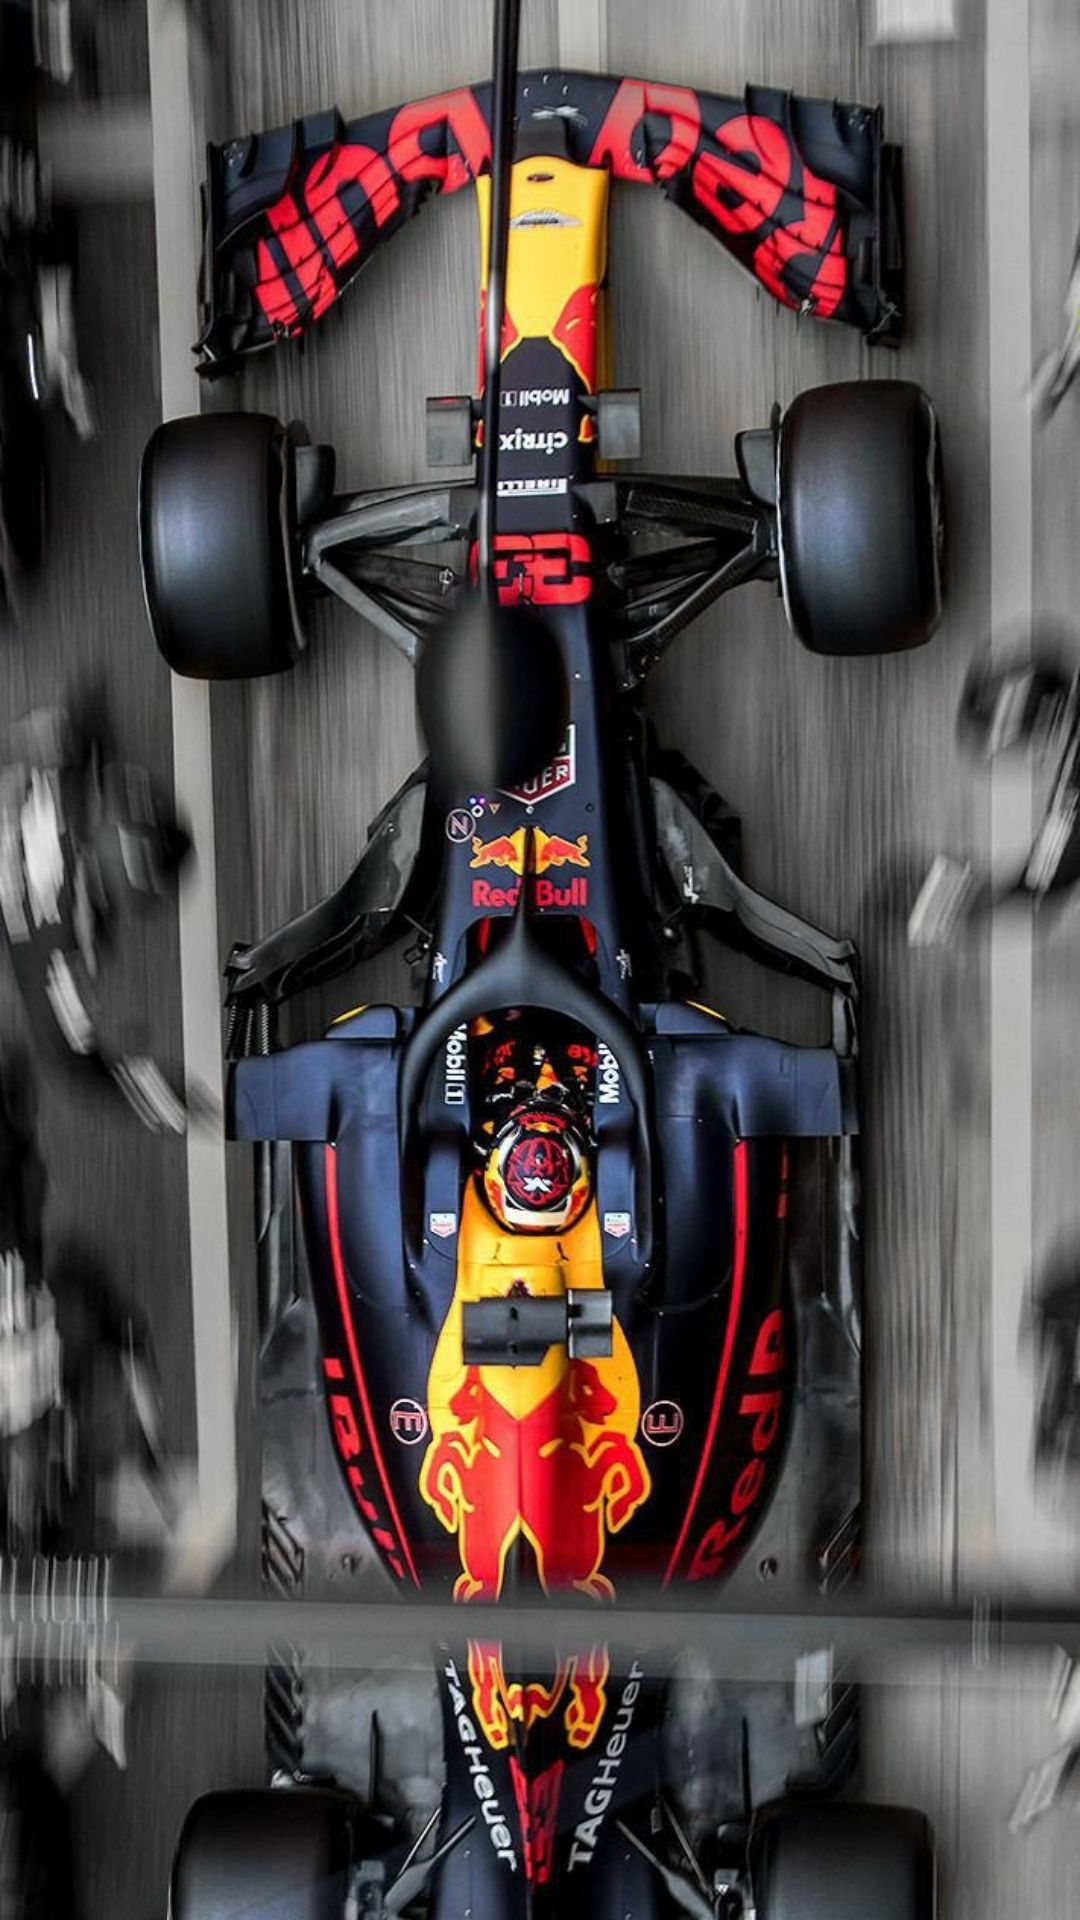 1080x1920 Red Bull F1 Racing Wallpapers Top 30 Best Red Bull F1 Racing Wallpapers Download